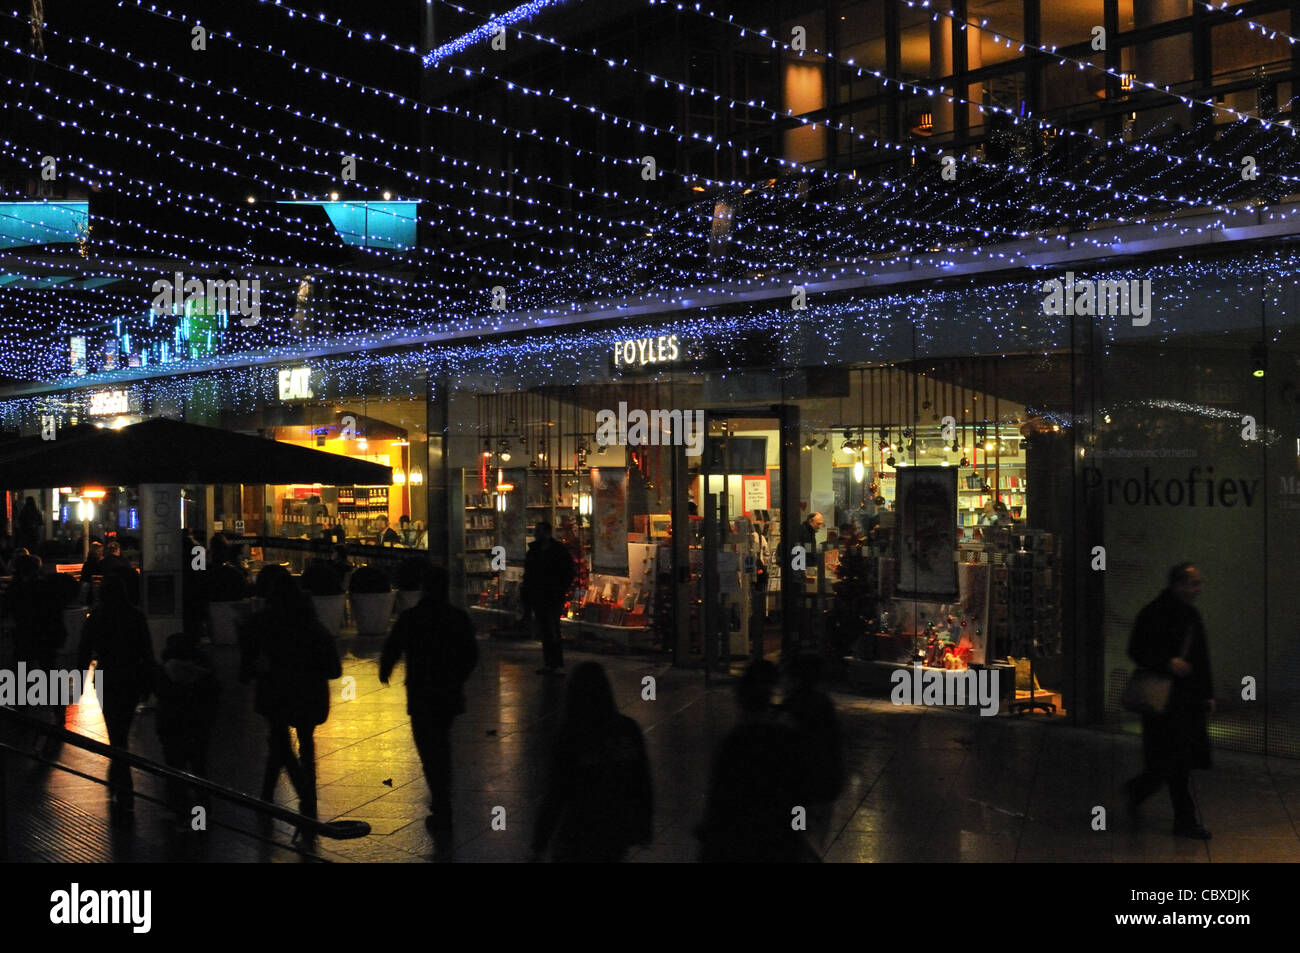 Foyles bookshop at South Bank Centre with its 2011 Christmas lights, London. Stock Photo